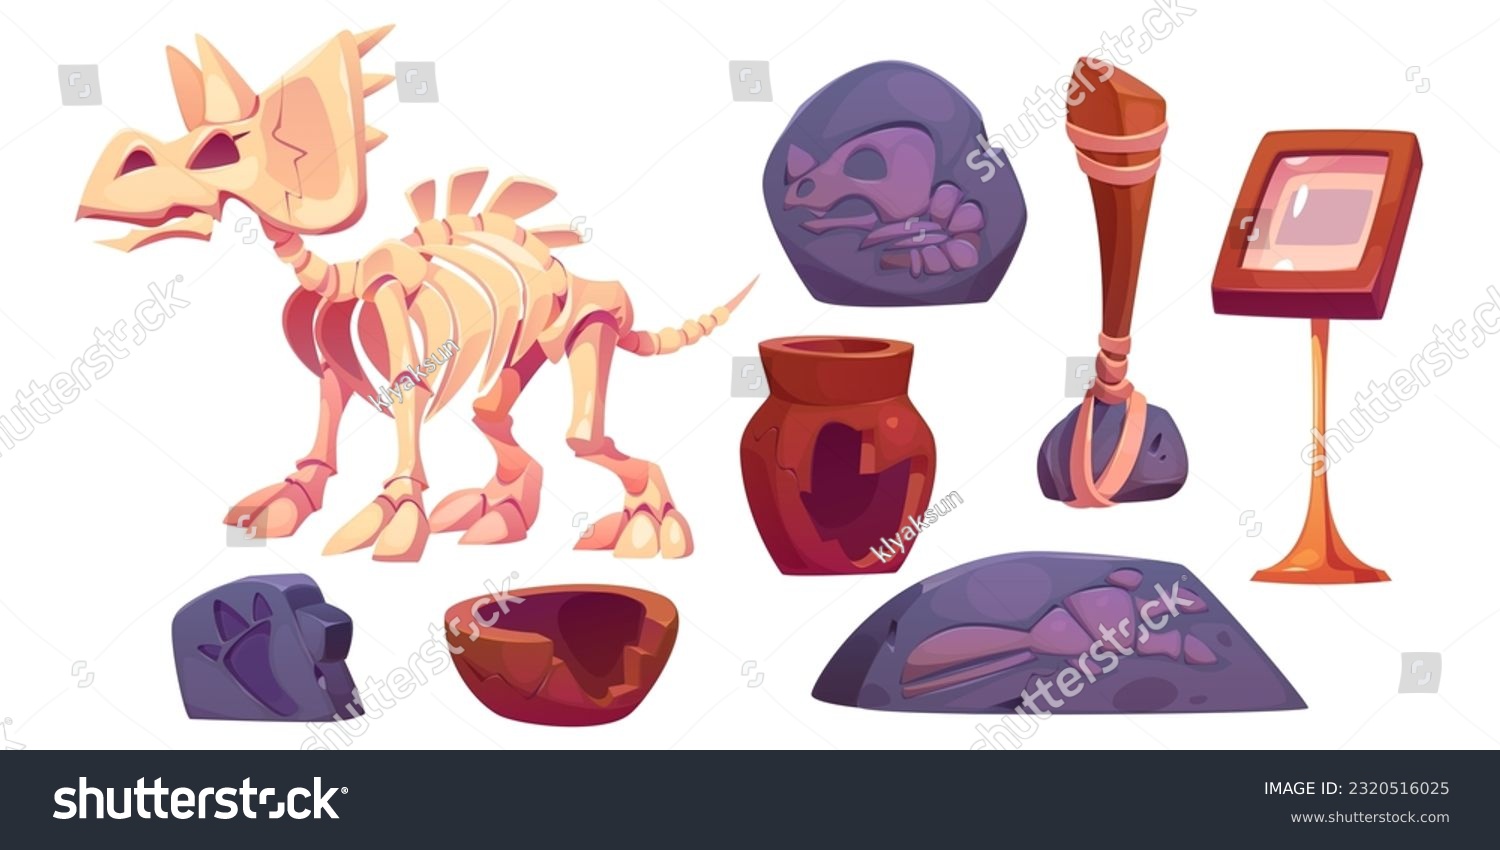 SVG of Fossil dinosaur skeleton for museum vector cartoon icon set. Stone footprint, triceratops bone and skull isolated on background. Dig ancient jurassic archaeologist discovery exhibit with broken vase svg